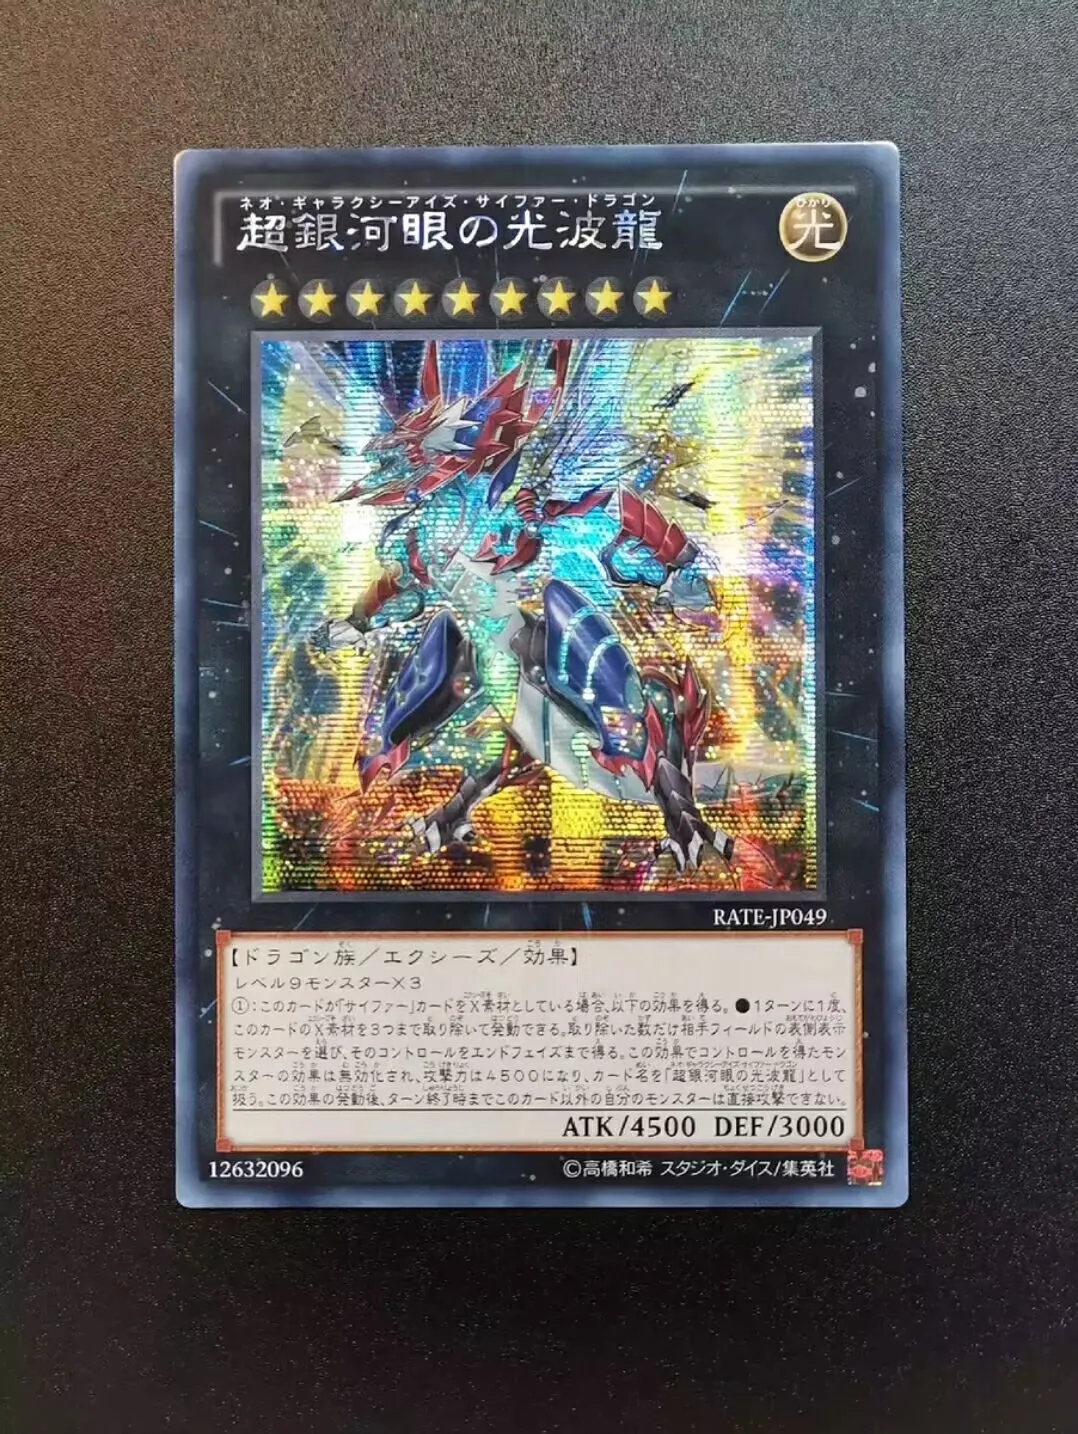 

Master duleVP16-JP003-Yugioh-Japanese - Galaxy-Eyes Cipher Blade Dragon - Ultra Collection Mint Card